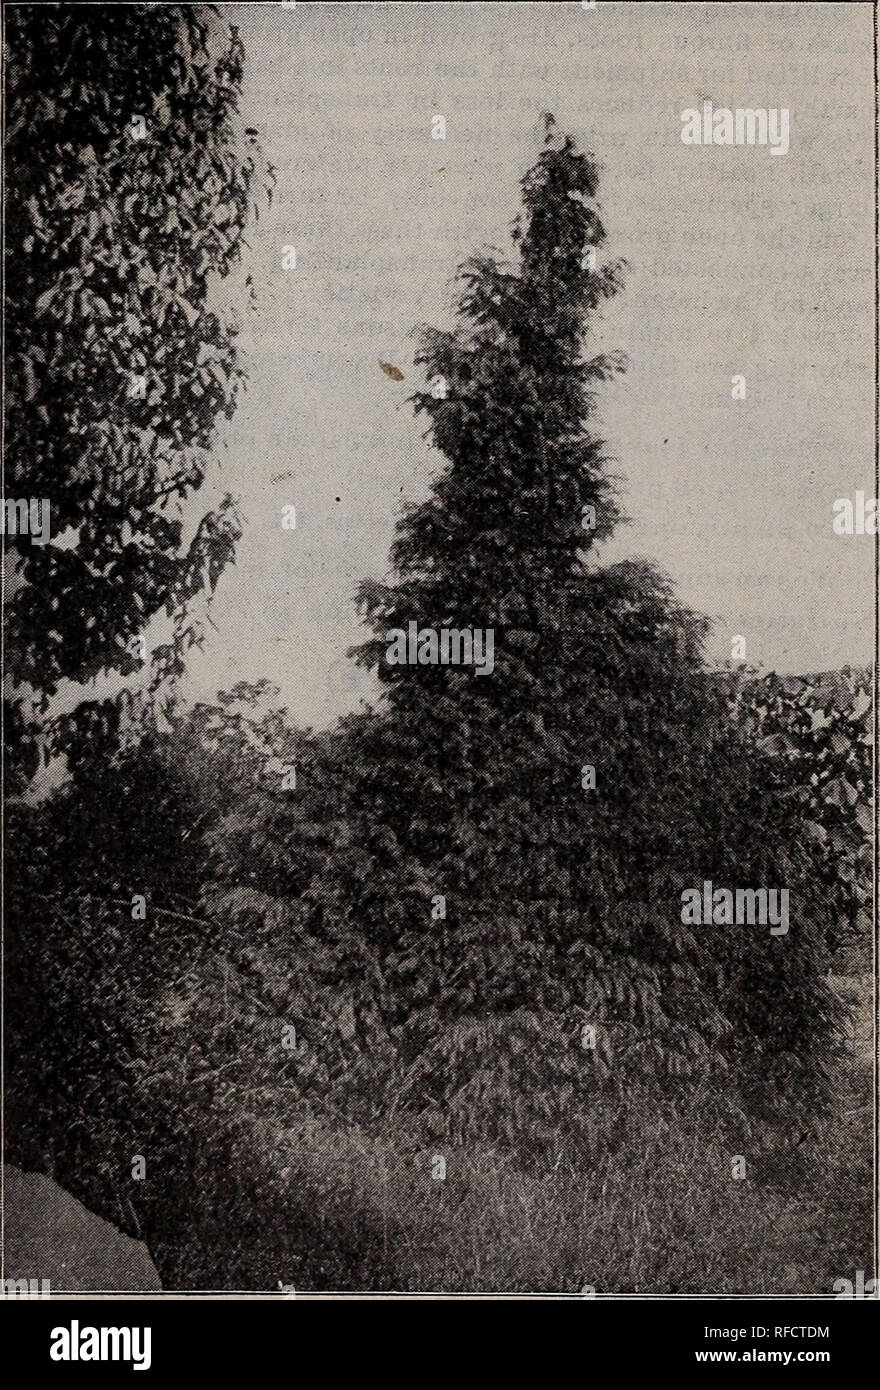 . Fruitland Nurseries. Nursery stock, Georgia, Augusta, Catalogs; Fruit trees, Seedlings, Catalogs; Fruit, Catalogs; Trees, Seedlings, Catalogs; Plants, Ornamental, Catalogs; Shrubs, Catalogs; Flowers, Catalogs. 34 P. J. BERCKMANS COMPANY'S TREE AND PLANT CATALOGUE ARBORVIT-ffi:- Biota Japonica Filiformis A new Japanese variety, -with thread-like foliage; of compact habit. We consider this one of the most distinct and desirable novelties, and it is becom- ing a great favorite. Well suited for cemeteries. Will probably attain a height of 10 to 12 feet. Fine plants, 12 to 15 inches, 50 cents eac Stock Photo